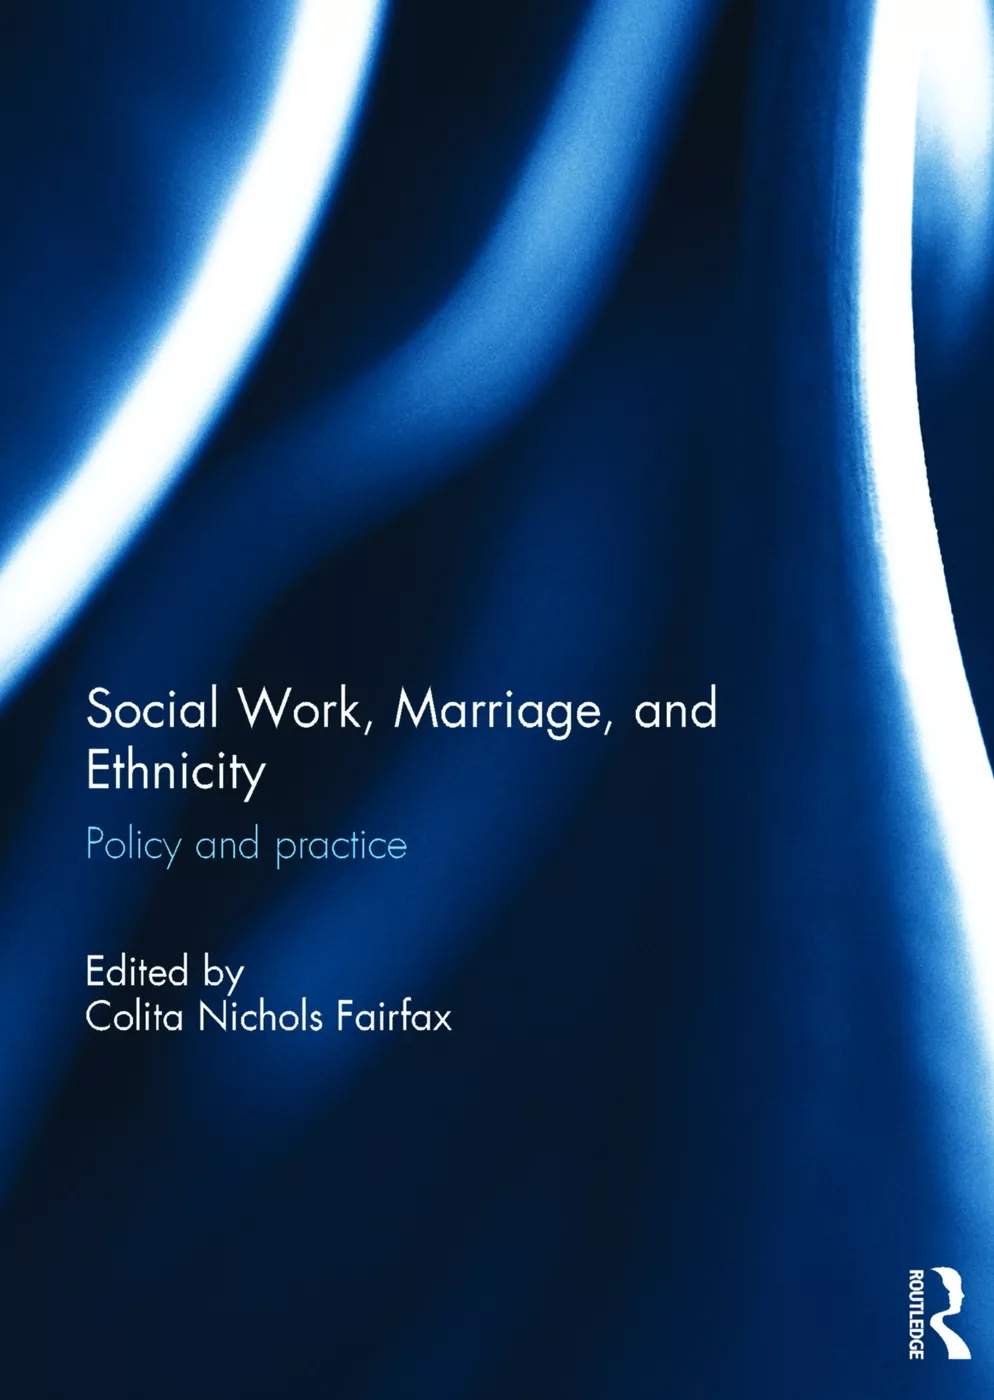 Social Work, Marriage, and Ethnicity: Policy and Practice